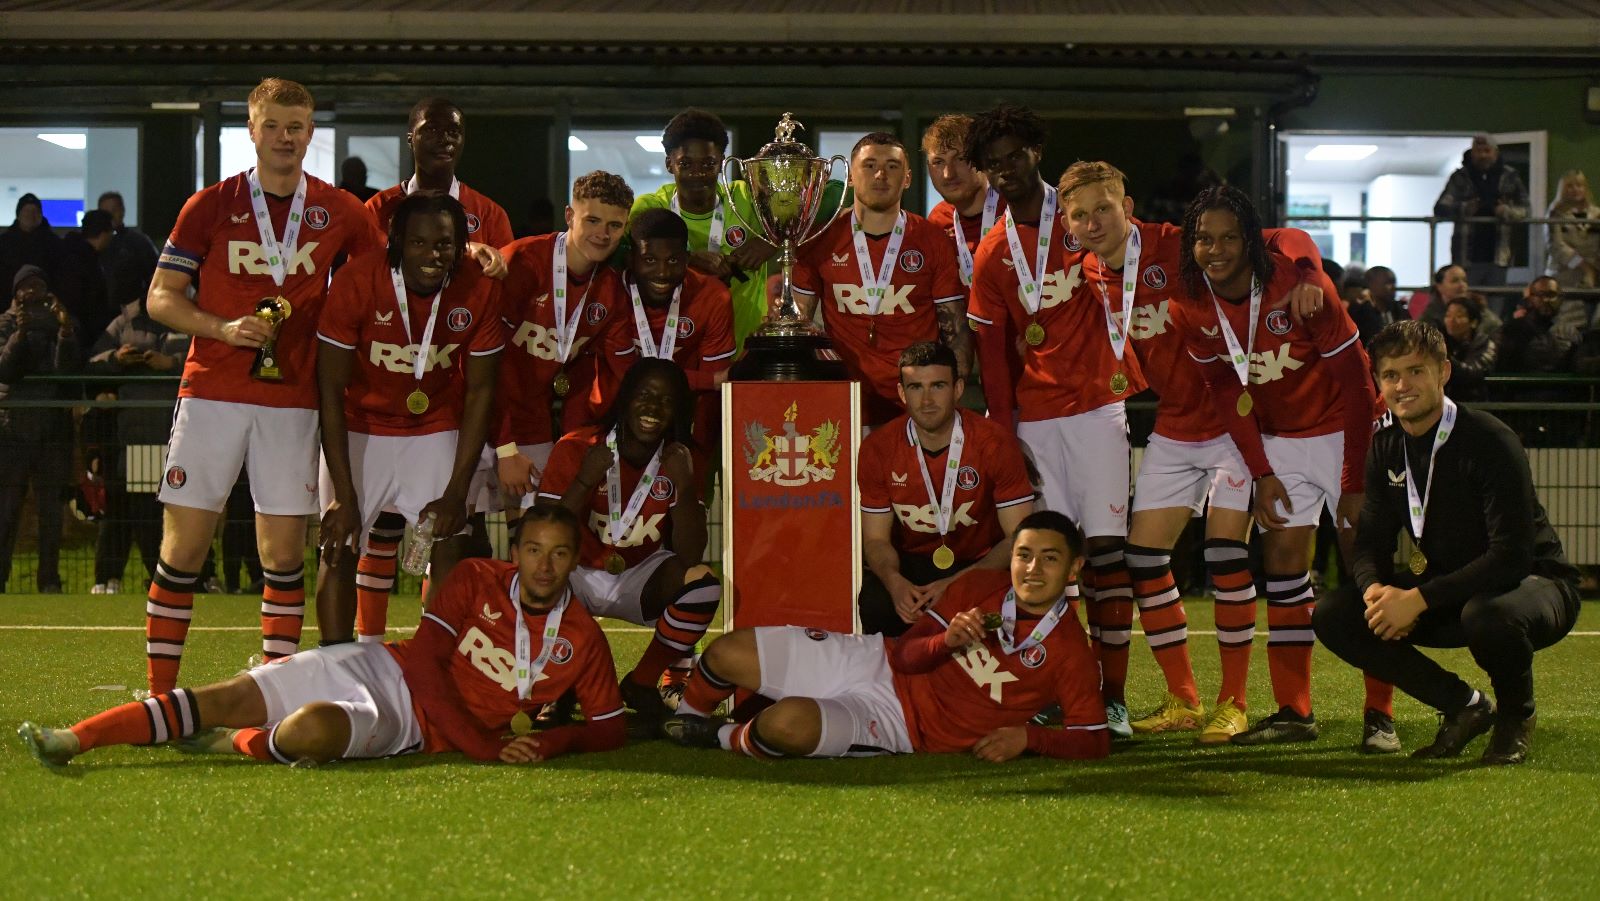 Charlton with the London Senior Cup Trophy